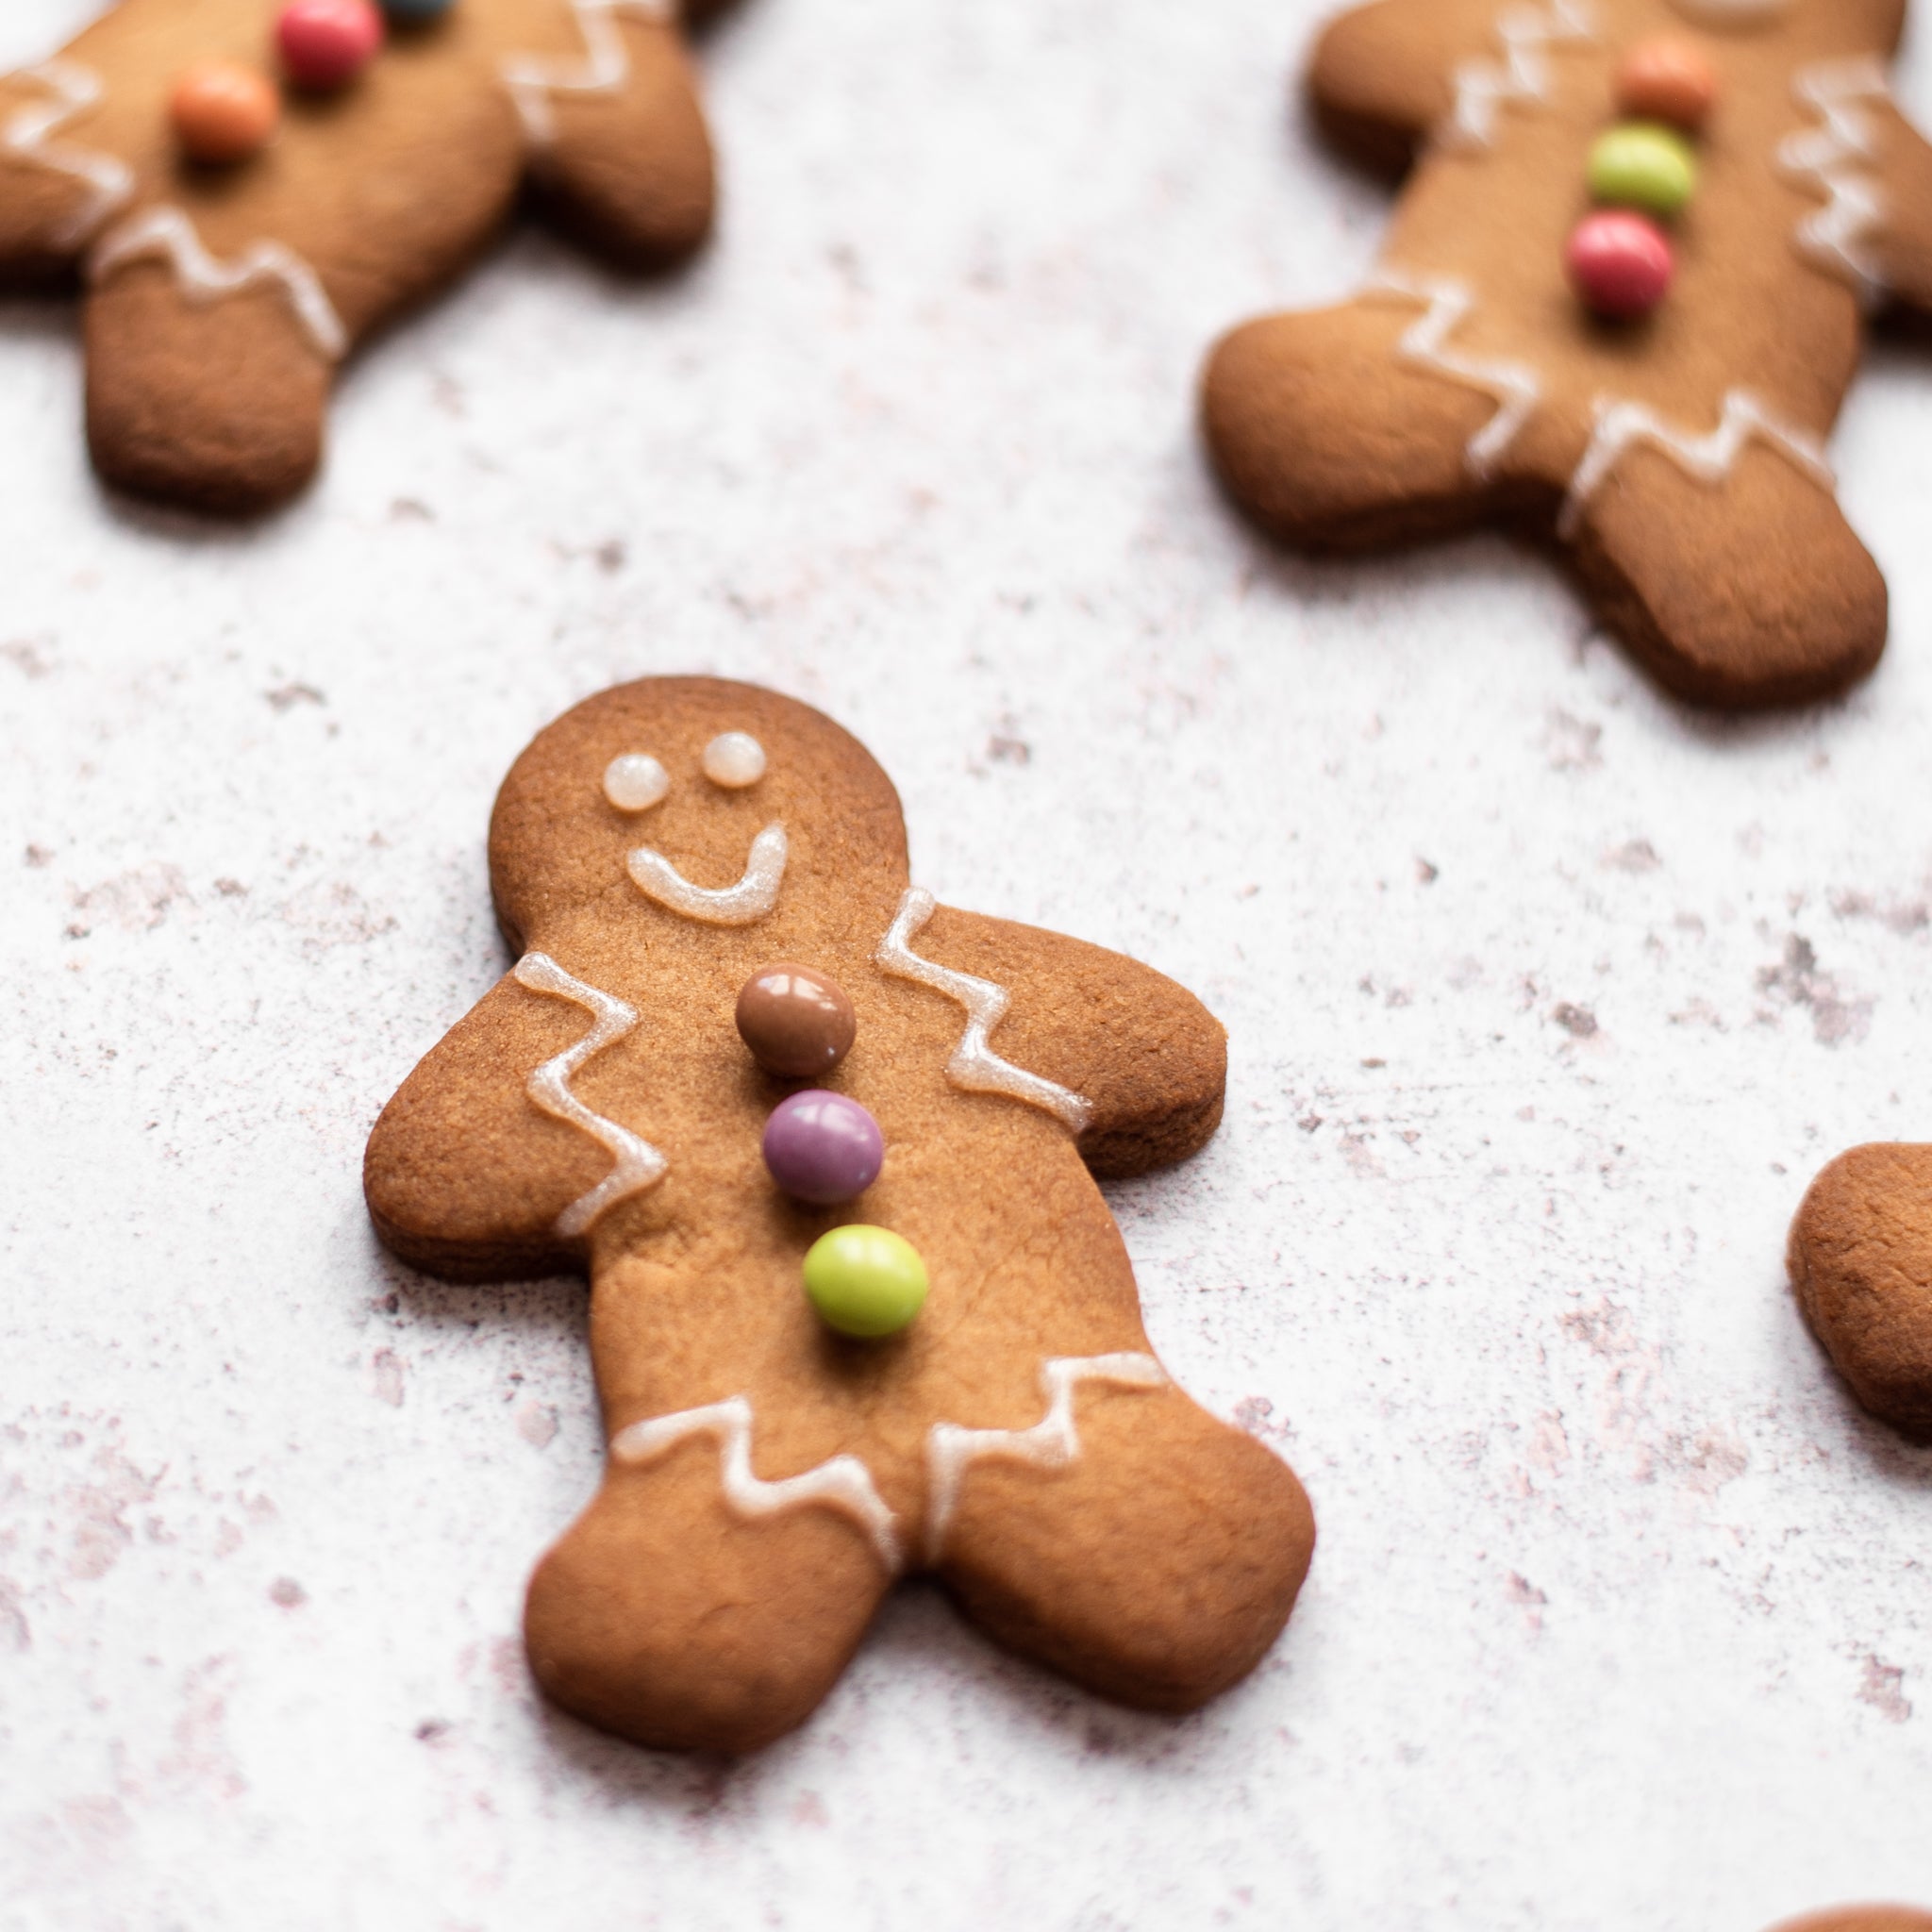 Gingerbread men decorated with white icing